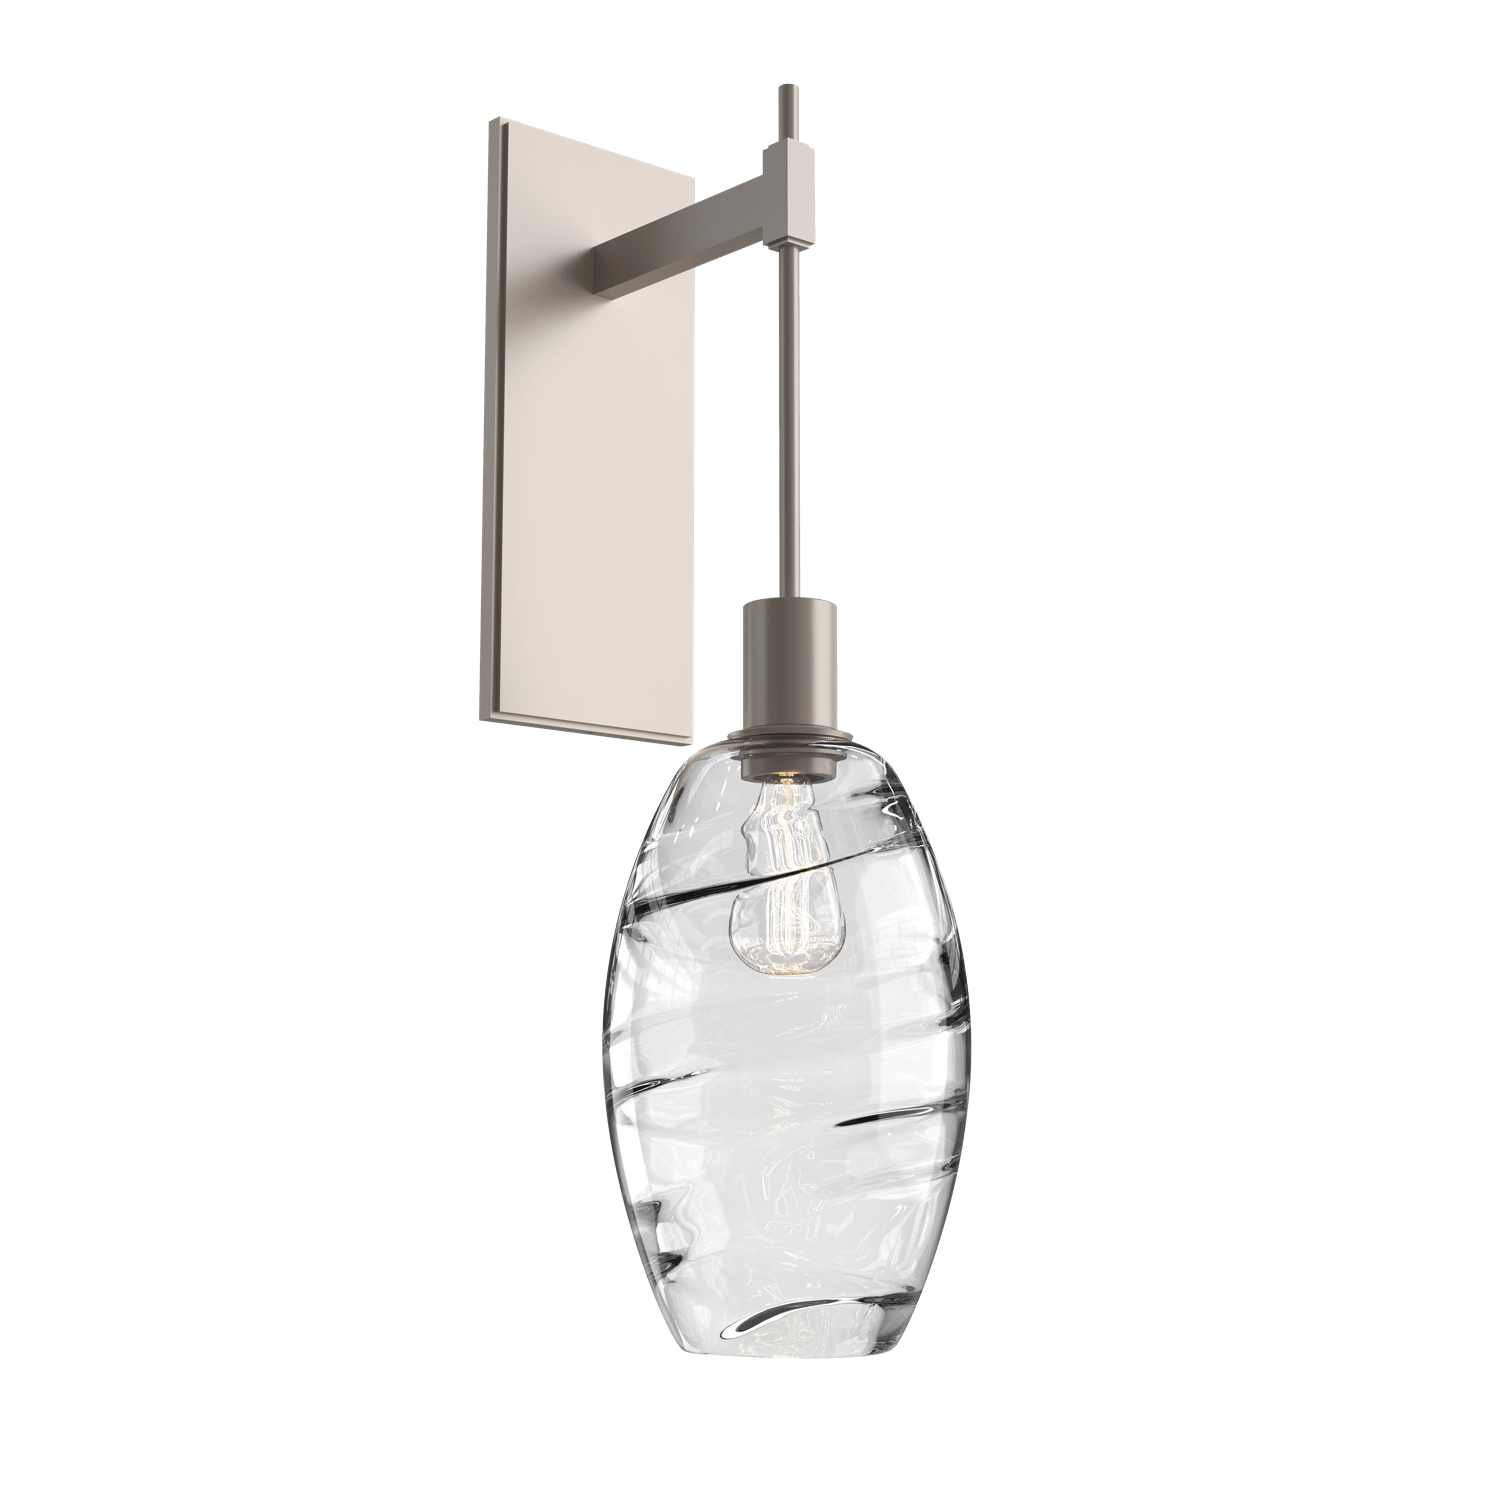 IDB0035-24-BS-OC-Hammerton-Studio-Optic-Blown-Glass-Elisse-tempo-wall-sconce-with-metallic-beige-silver-finish-and-optic-clear-blown-glass-shades-and-incandescent-lamping